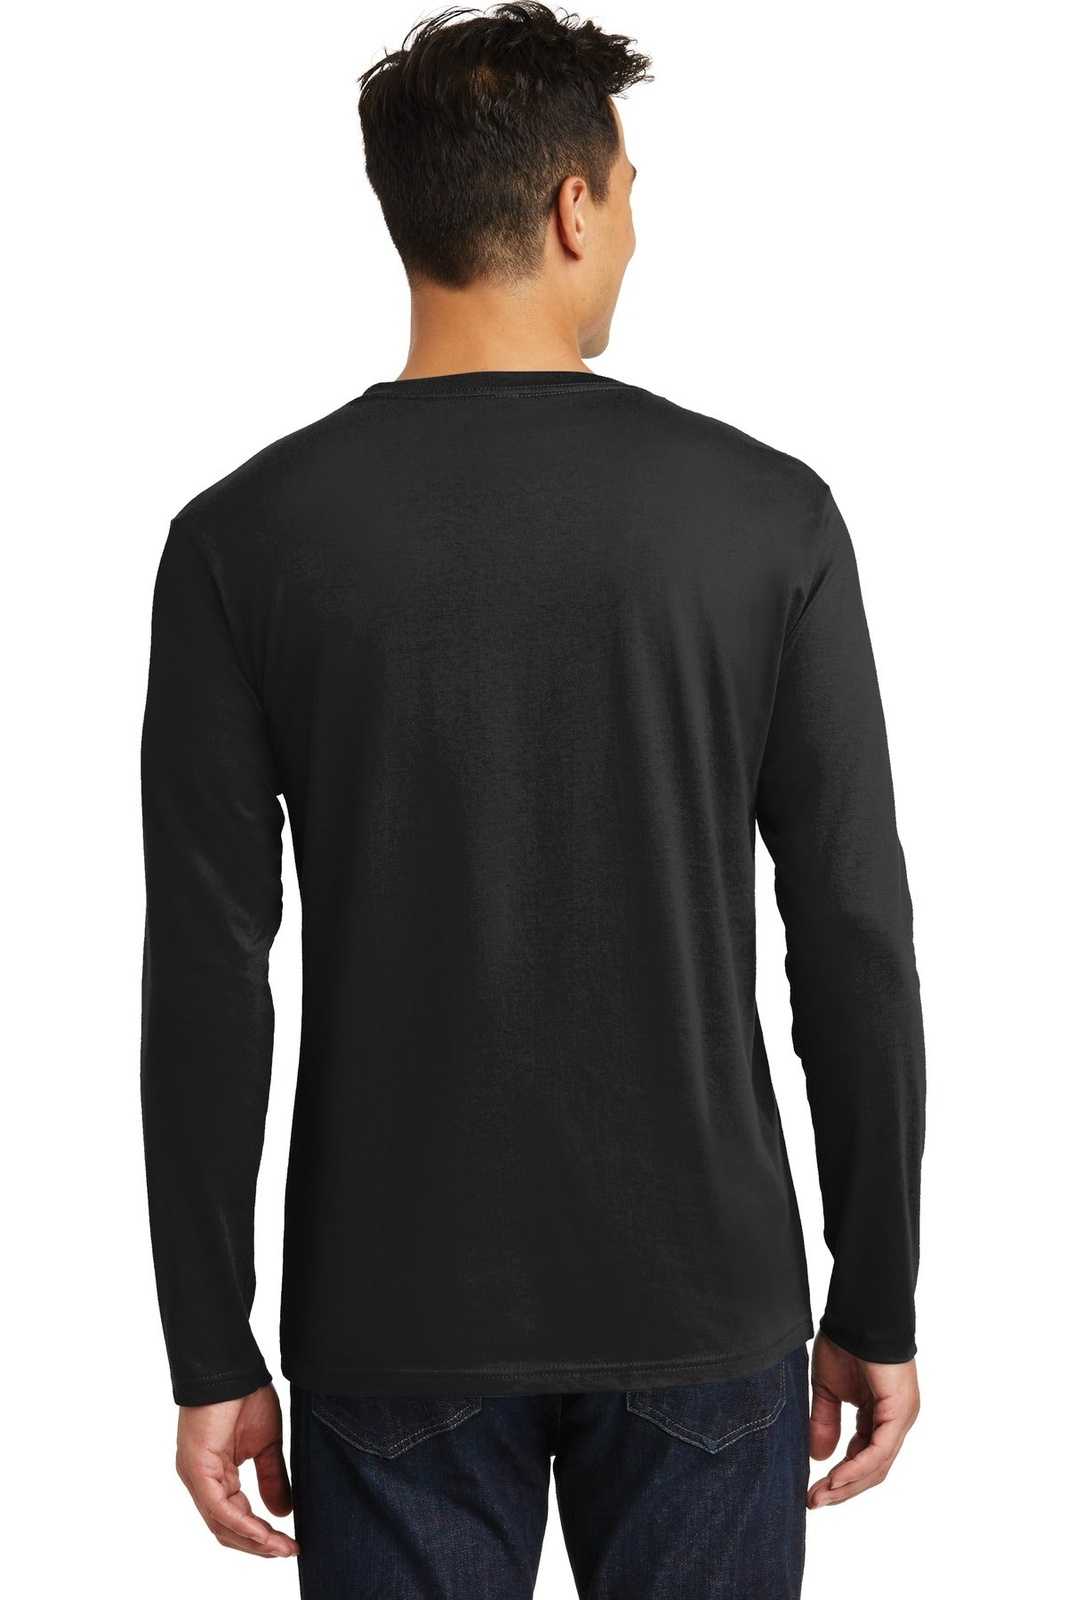 District DT105 Perfect Weight Long Sleeve Tee - Jet Black - HIT a Double - 1